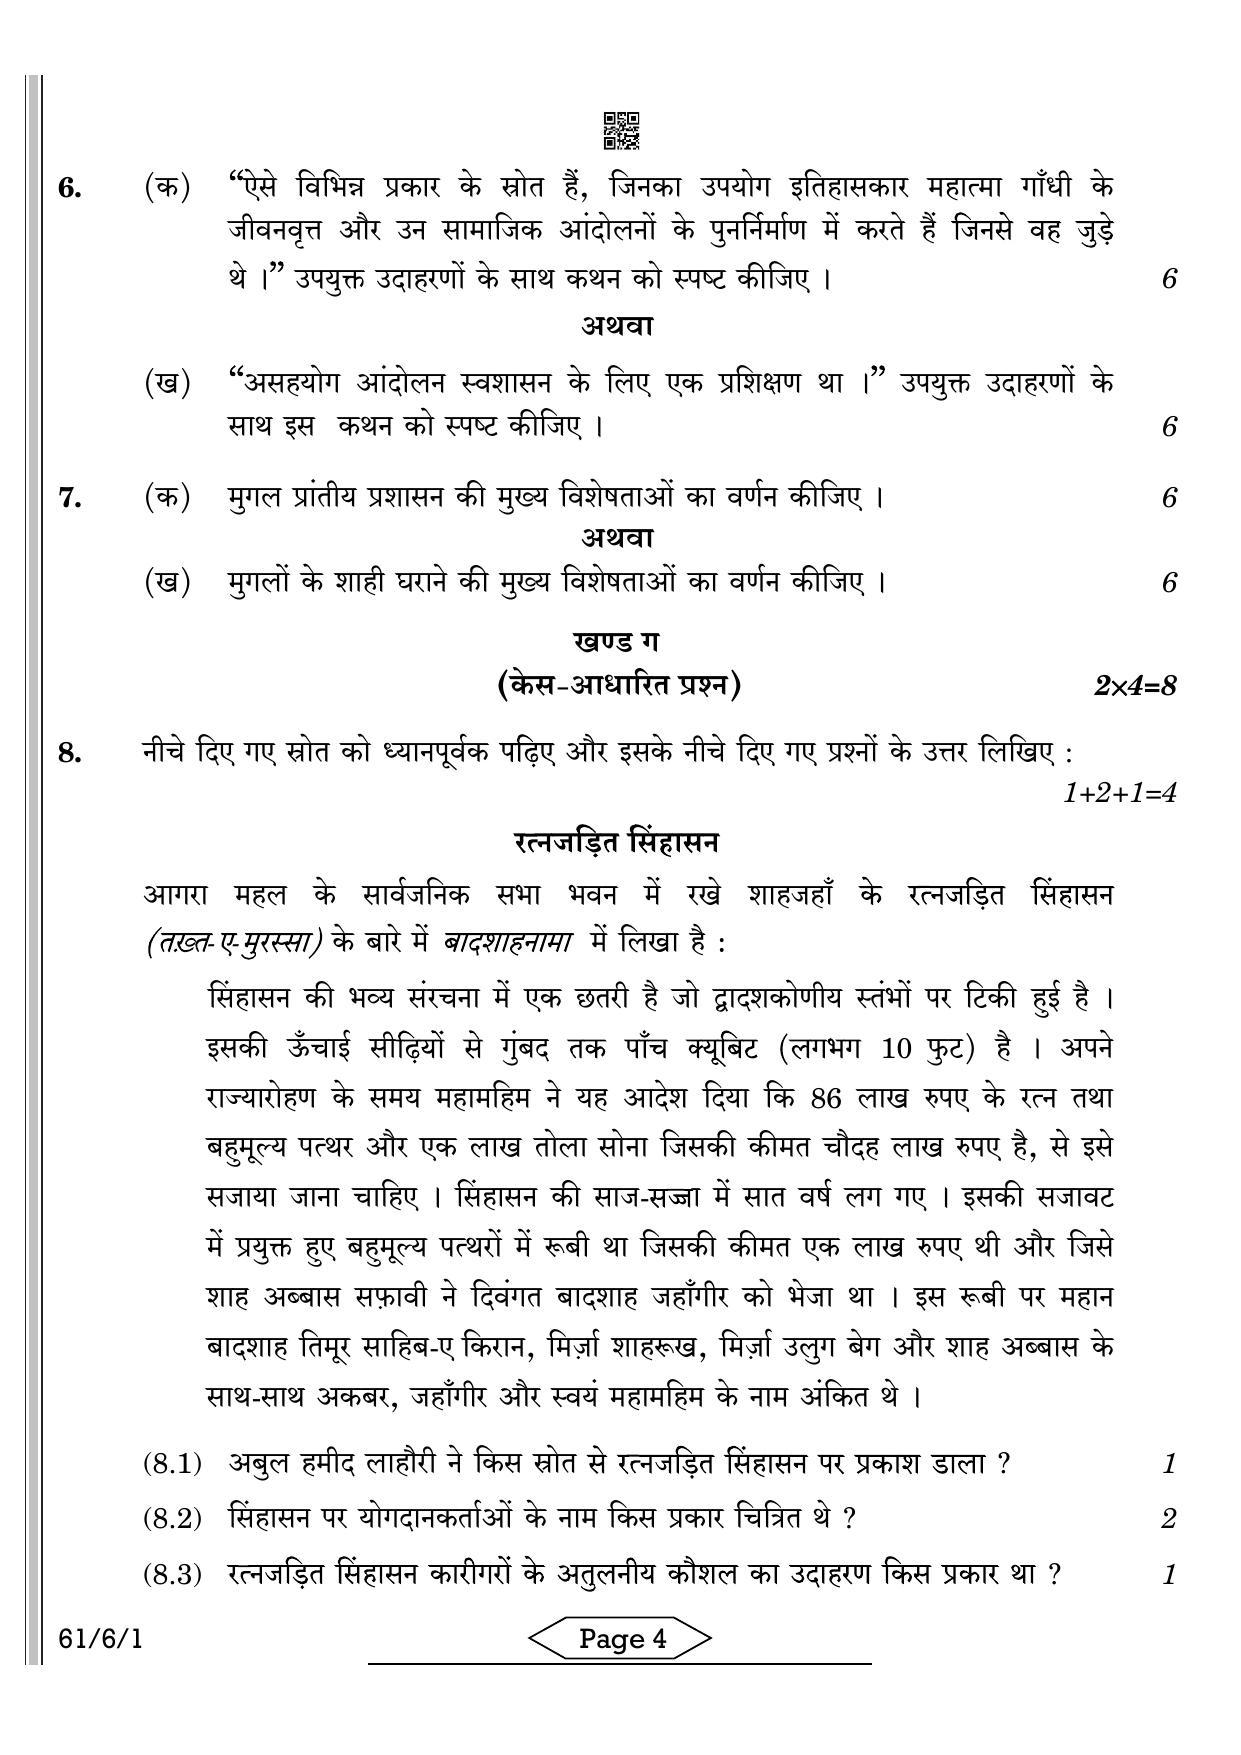 CBSE Class 12 61-6-1 HISTORY 2022 Compartment Question Paper - Page 4